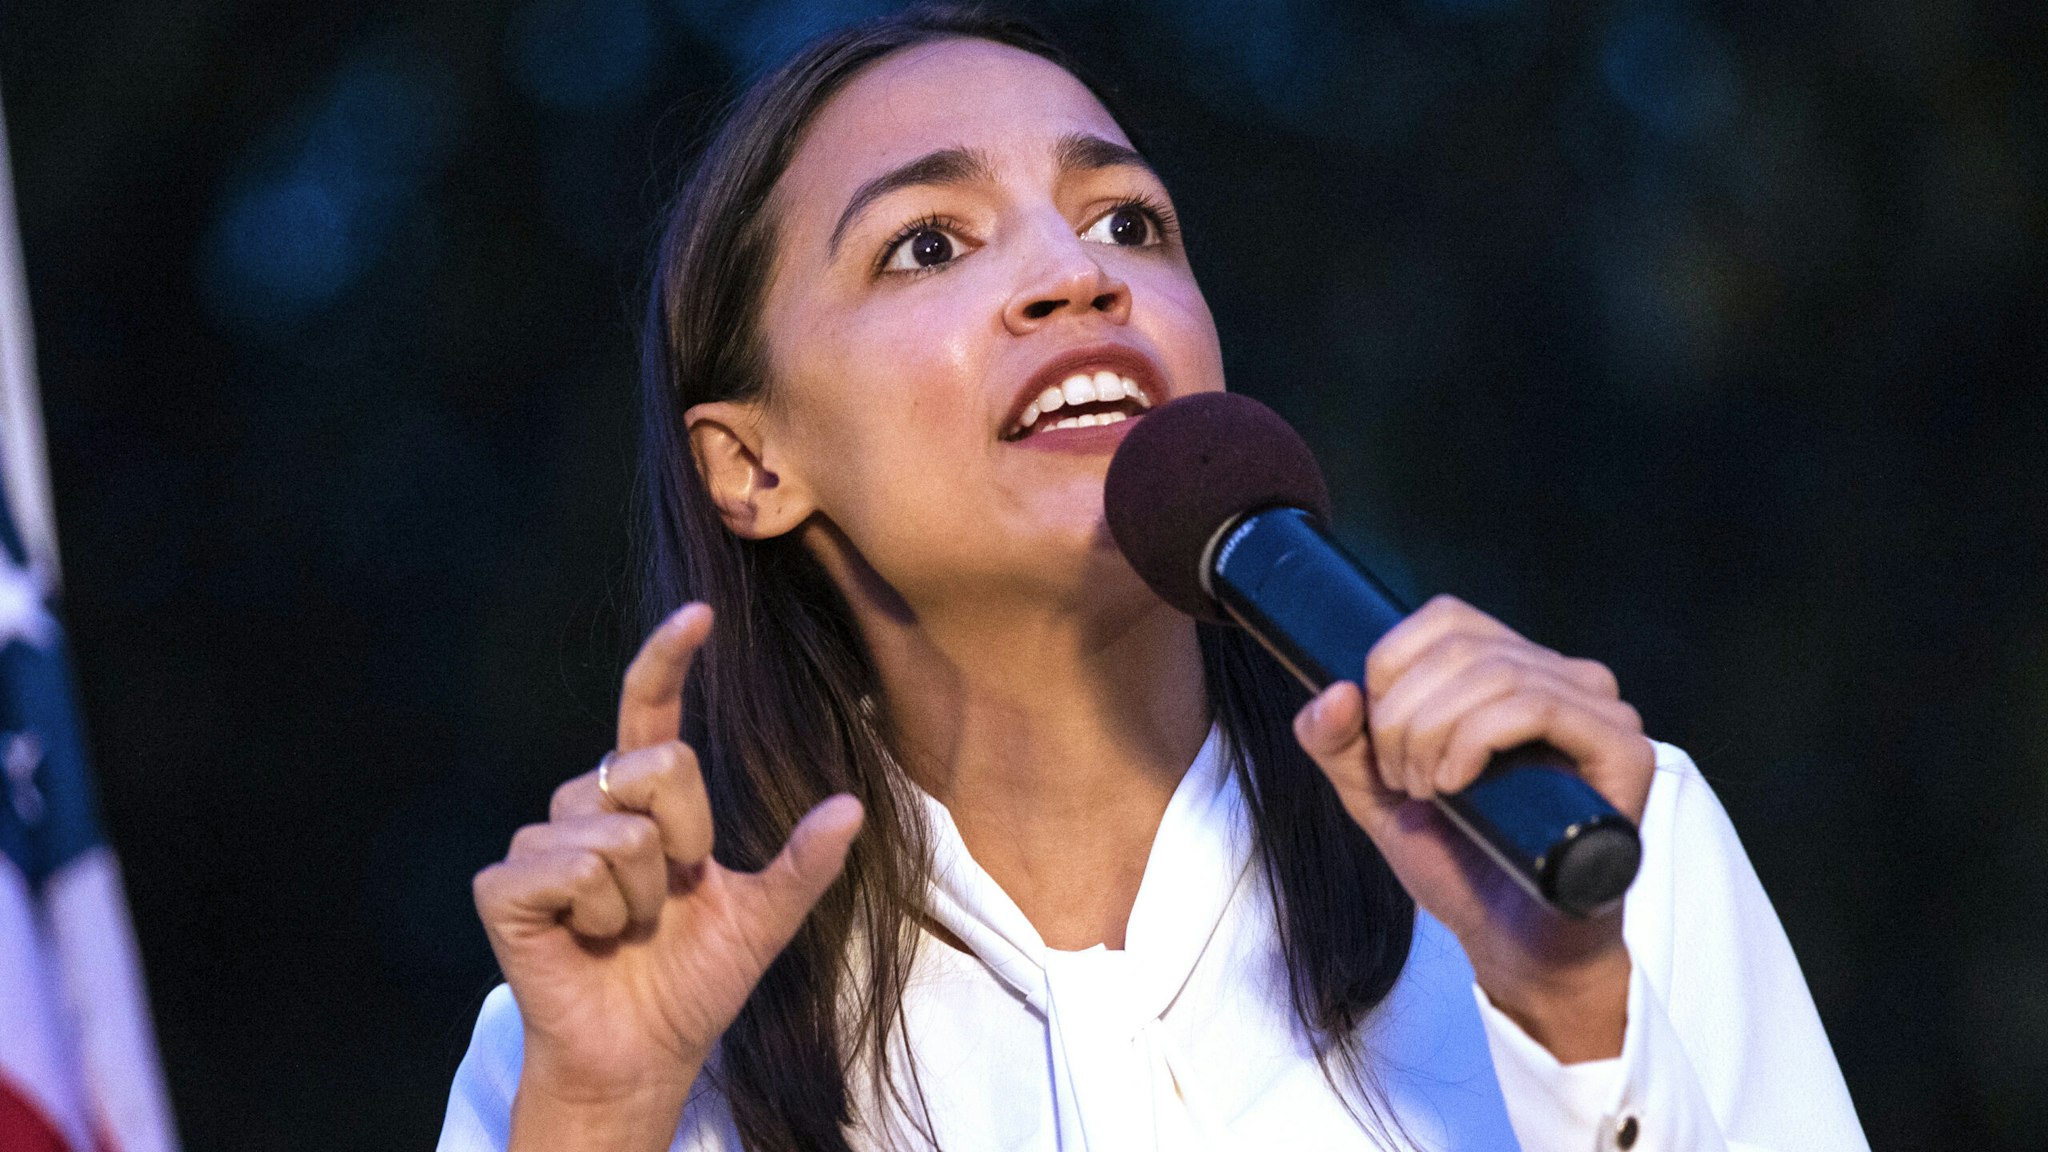 NEW YORK, NY - AUGUST 5: U.S. Rep. Alexandria Ocasio-Cortez (D-NY) speaks during a vigil for the victims of the recent mass shootings in El Paso, Texas and Dayton, Ohio, in Grand Army Plaza on August 5, 2019 in the Brooklyn borough of New York City. Lawmakers and local advocates called on Congress to enact gun control legislation and encouraged citizens to vote for politicians who would support those measures.